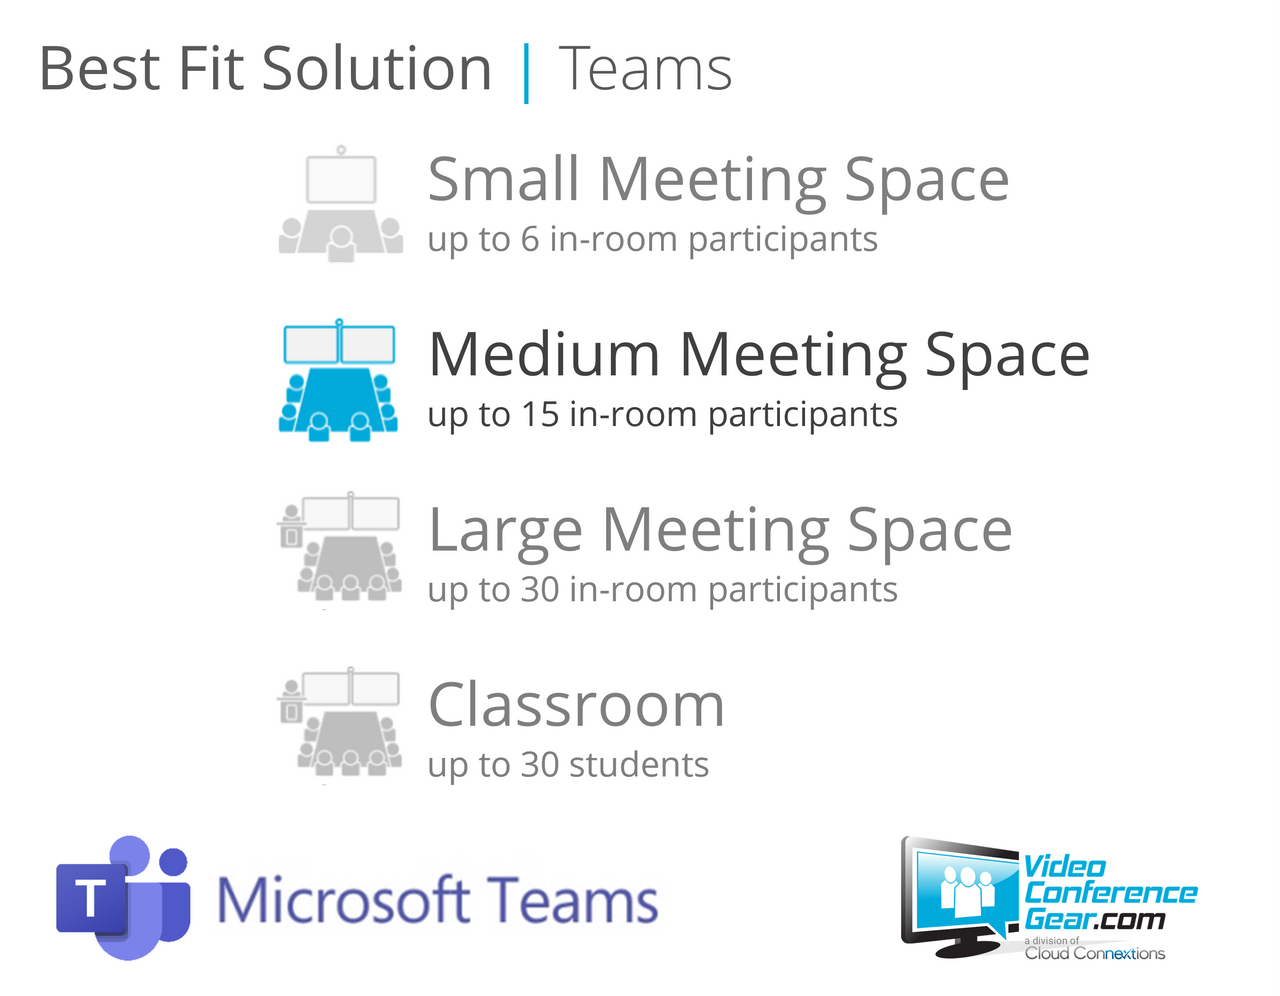 Microsoft Teams Rooms Solution with AVer CAM570 and Nureva HDL200 (White) Small and Medium Room